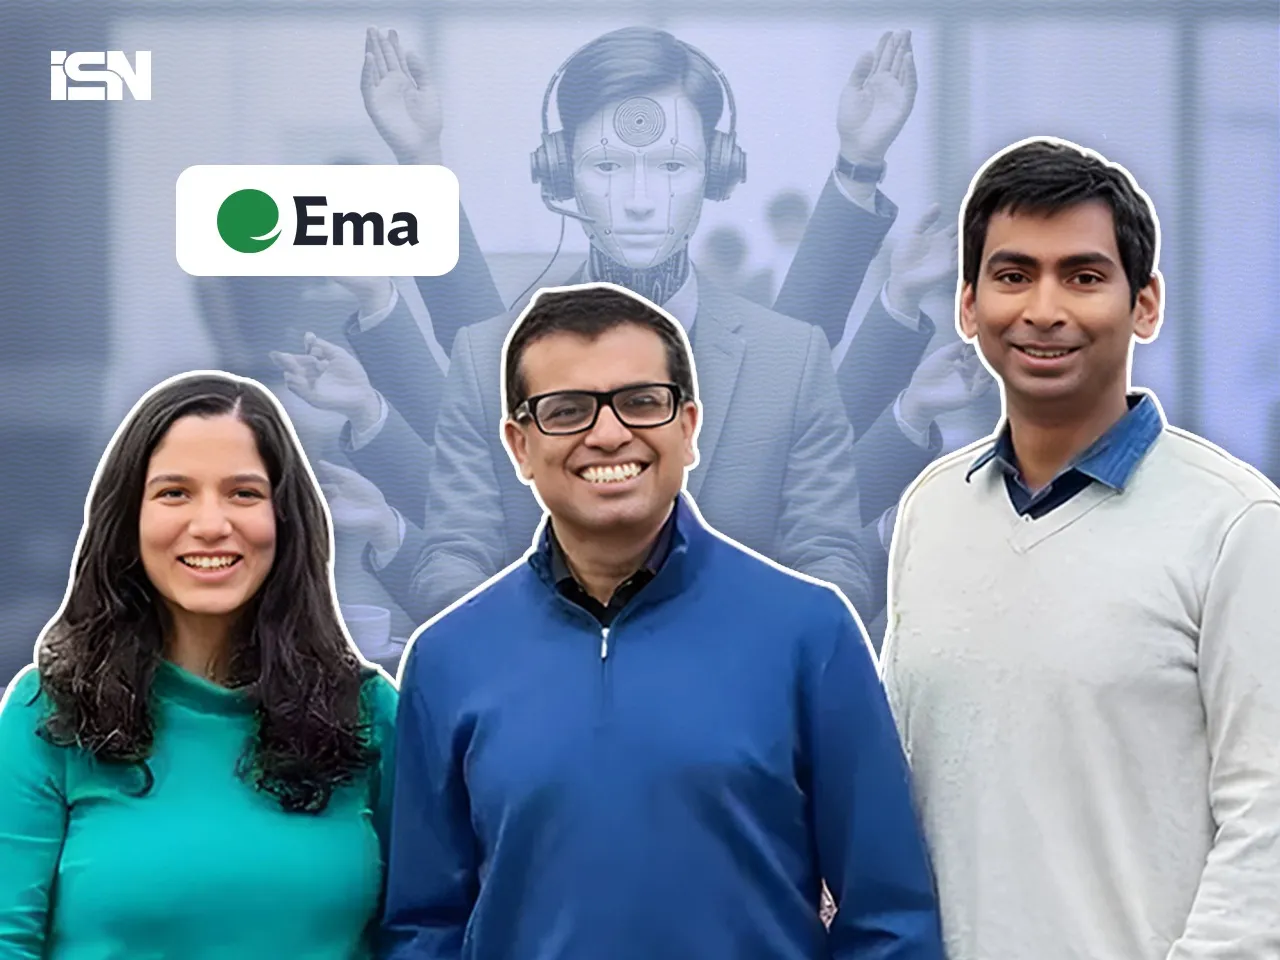 Gen AI startup Ema raises $25M led by Accel, Prosus, others